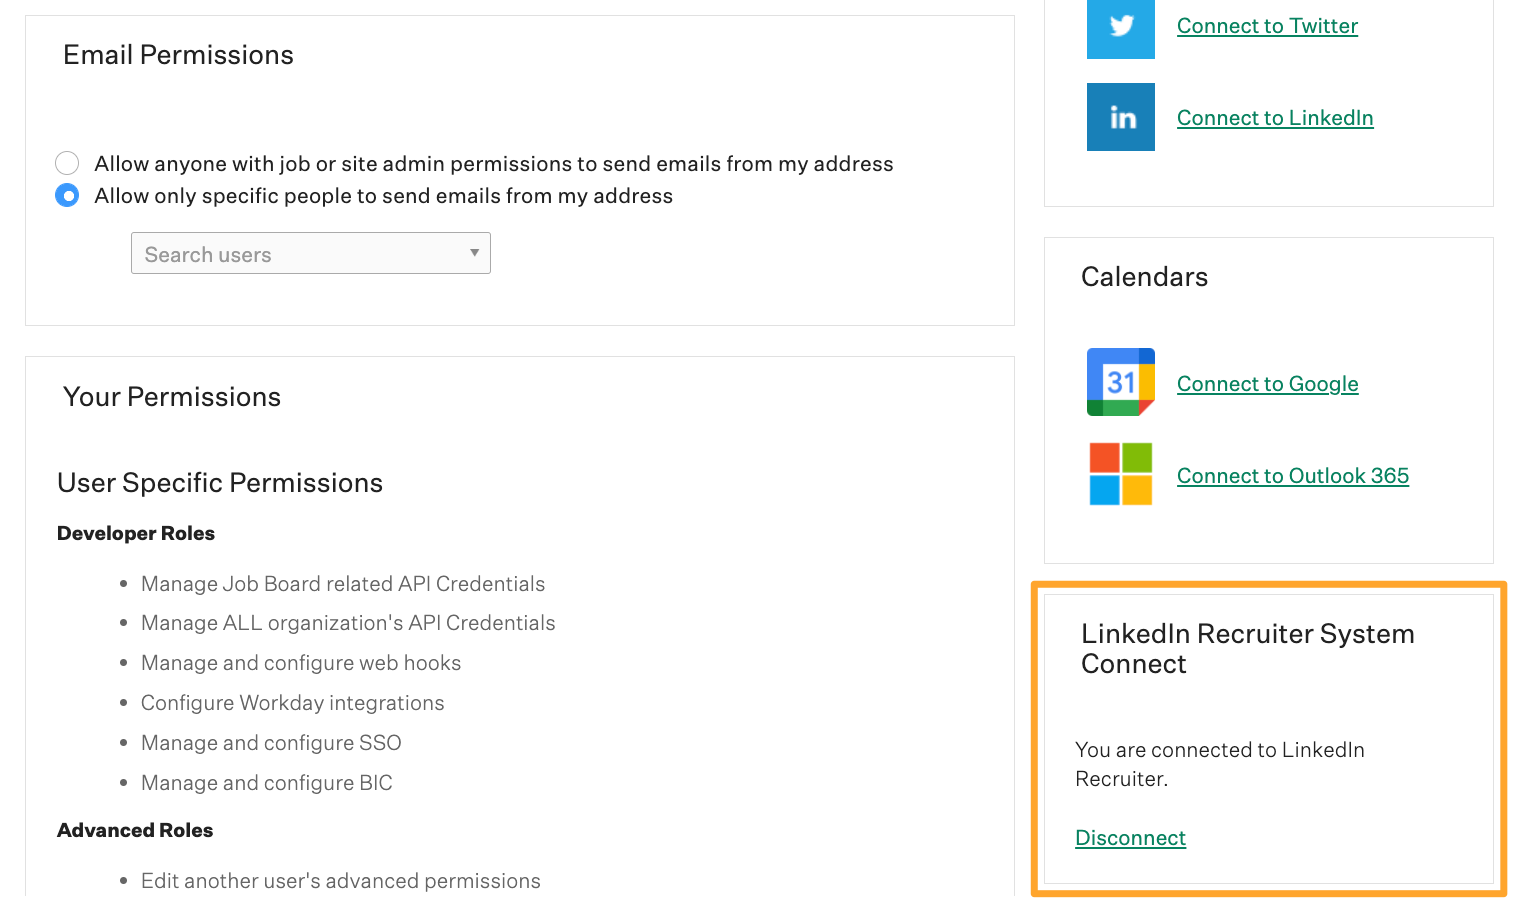 An example LinkedIn Recruiter account is shown connected on the Account Settings page with a Disconnect button highlighted